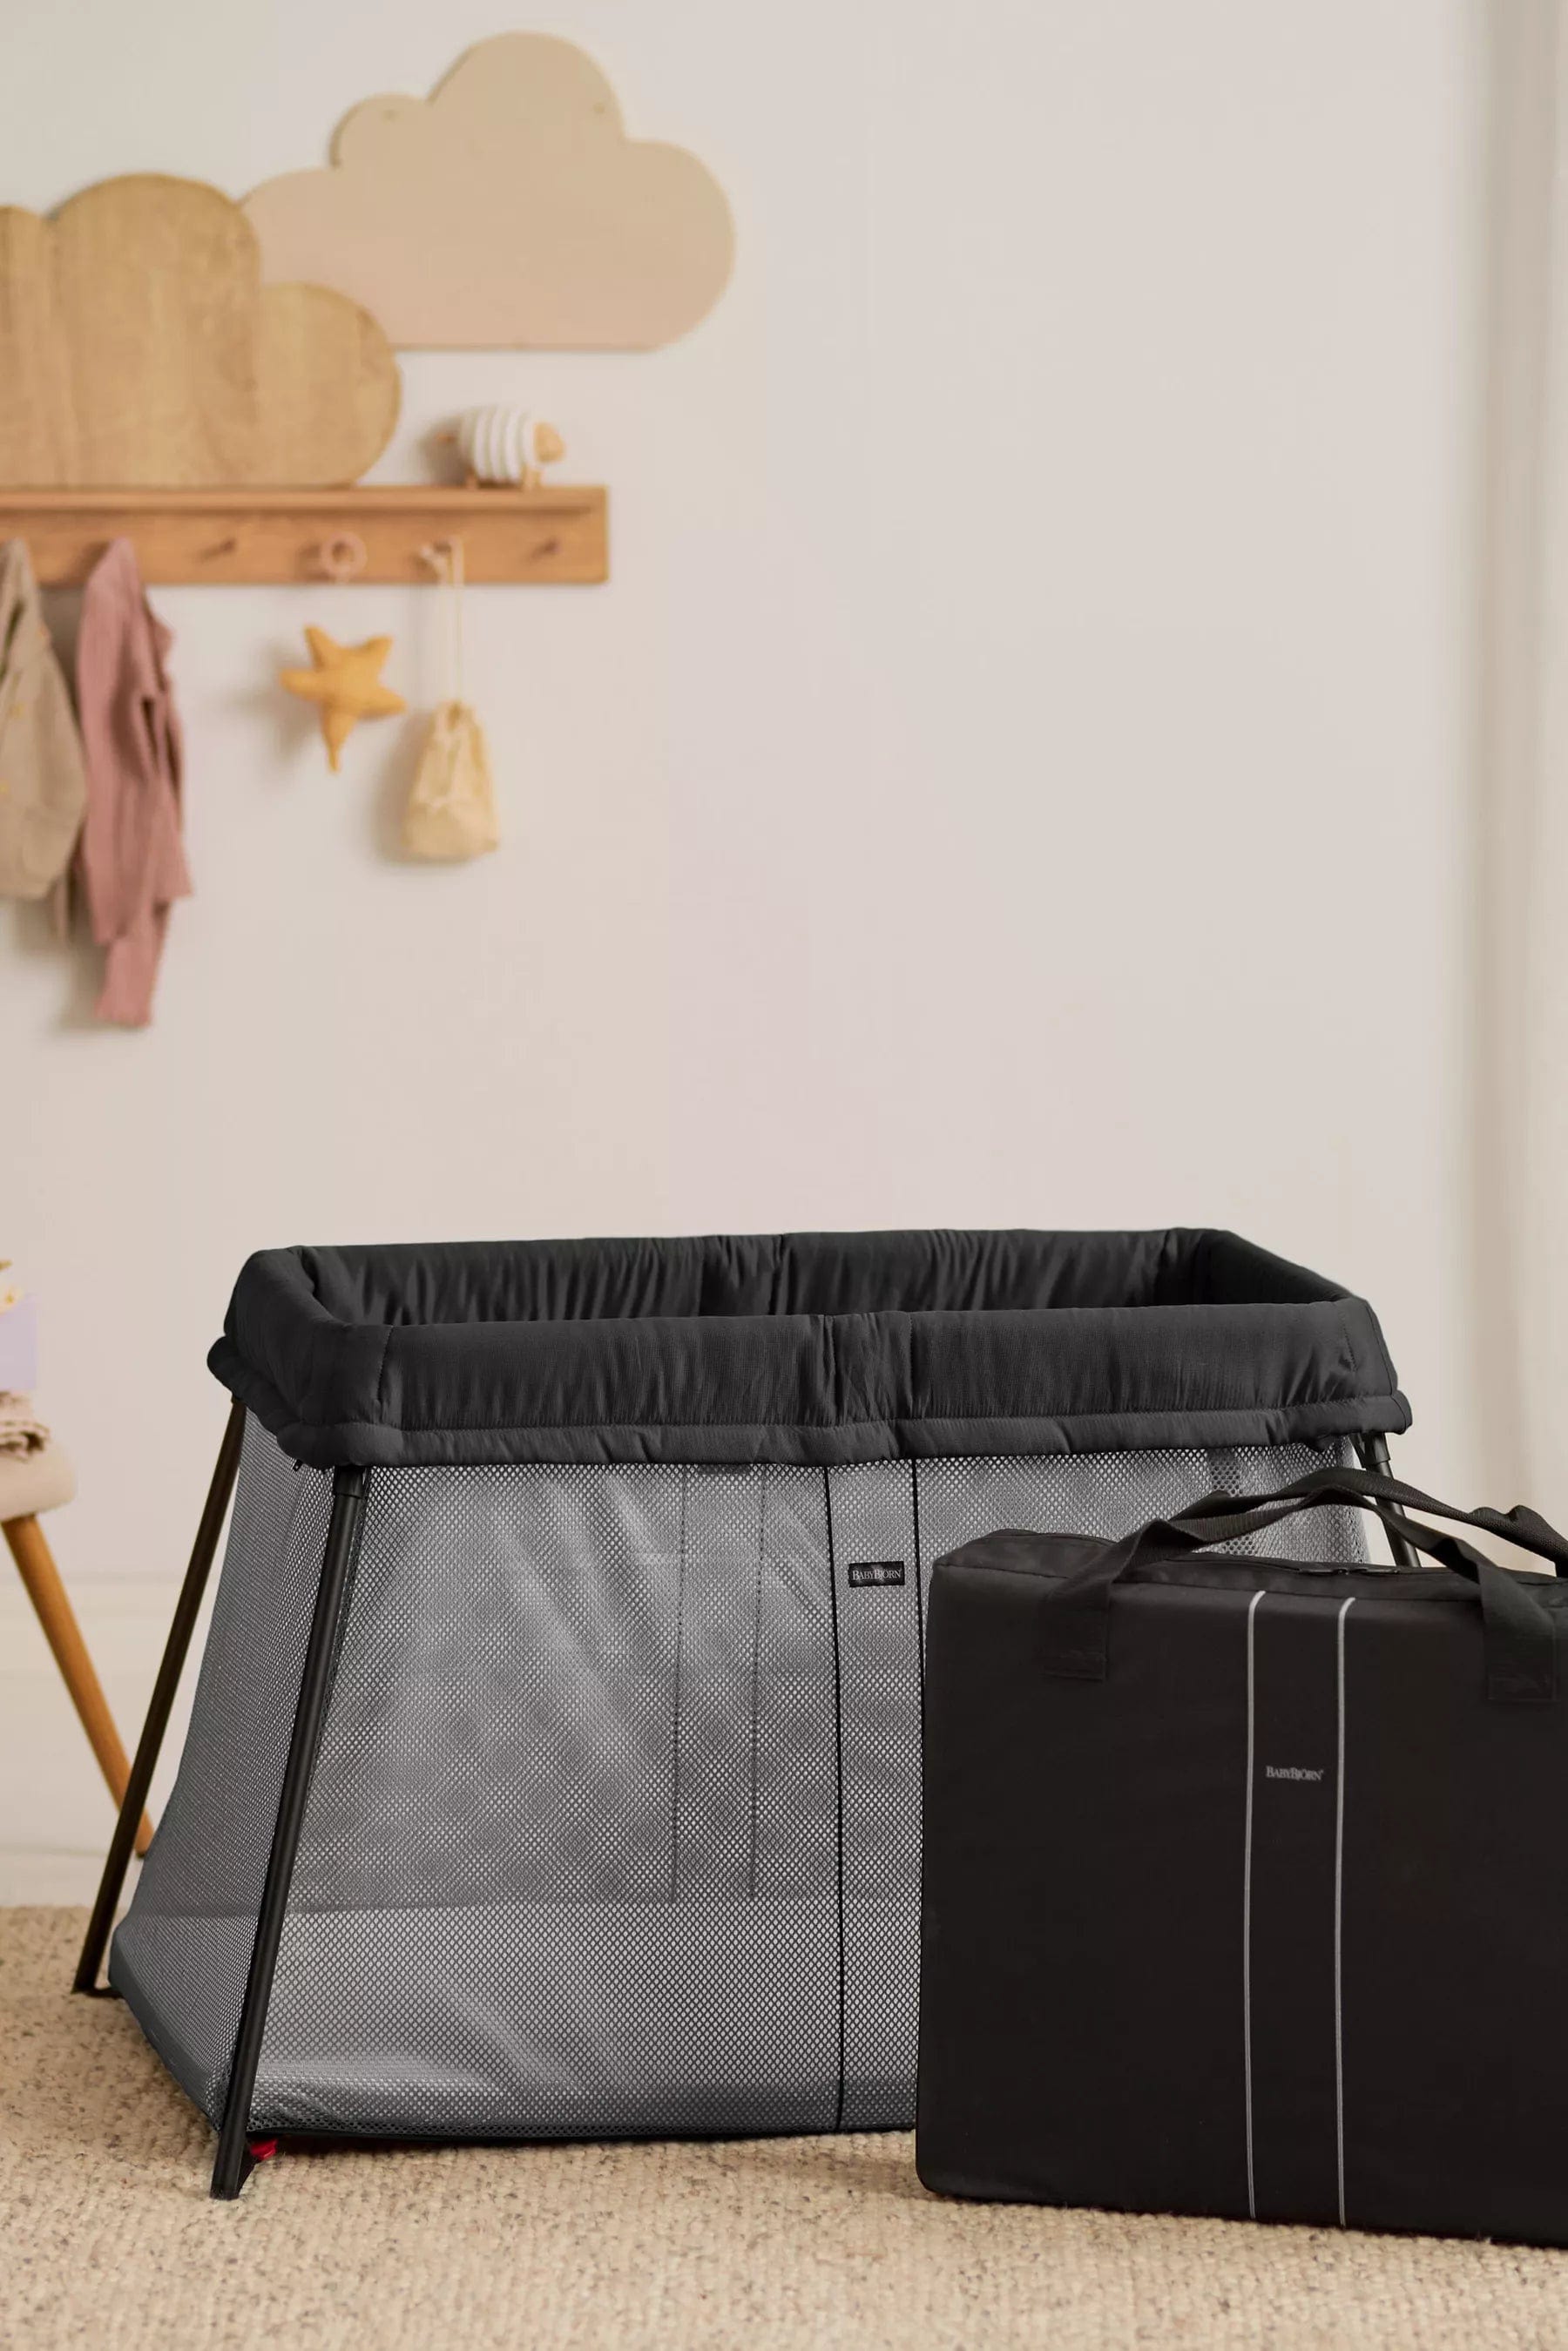 BabyBjorn Black BabyBjorn Travel Crib Light in Black with Fitted Sheet